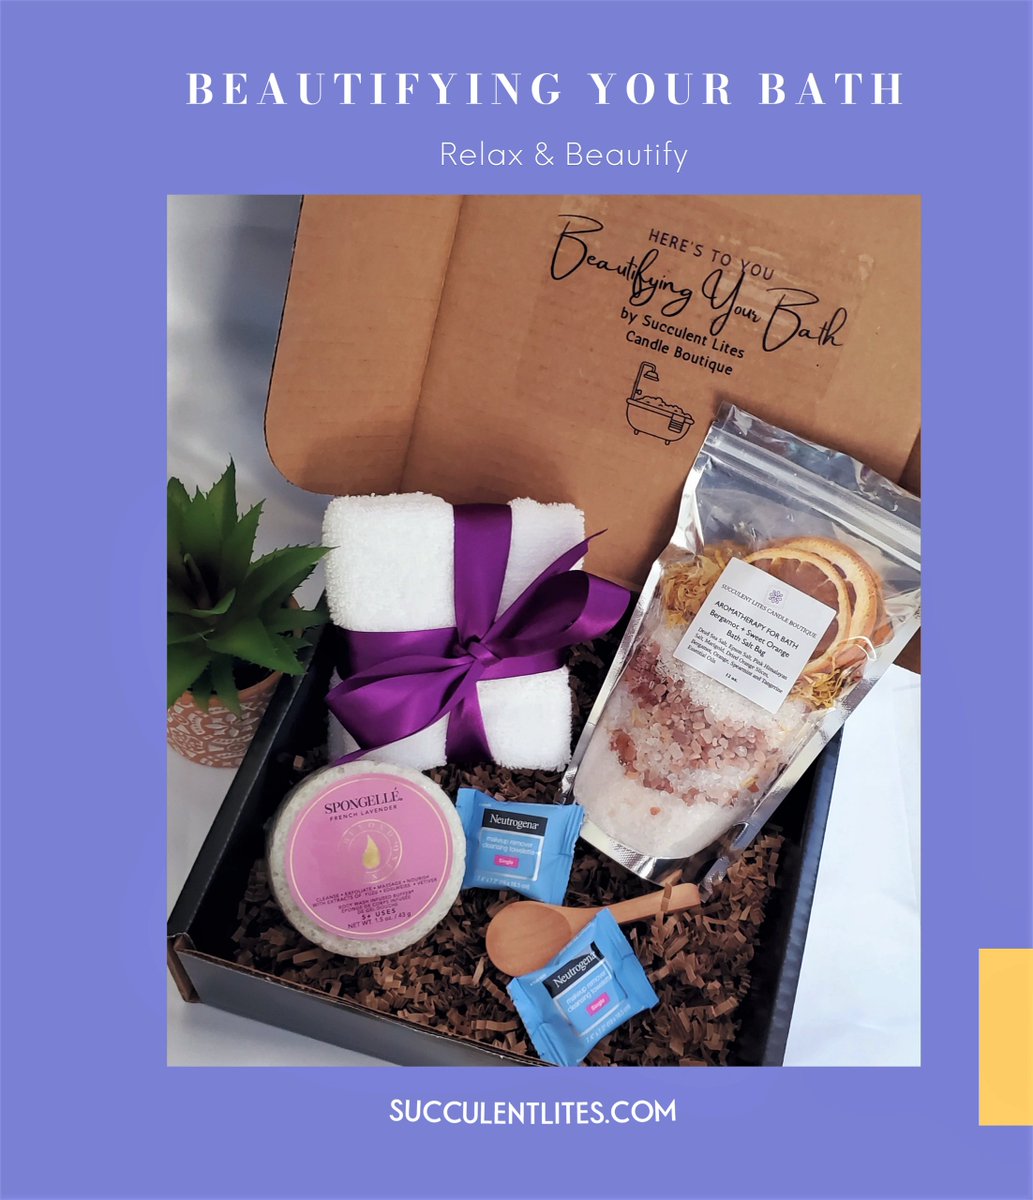 Its your time! Beautify yourself!!

Beautifying Your Bath Self-Care Box available at succulentlites.com

#selfcaretime #beautifyme #itsmetime #soakandrelax #soakandbeautify #self-care #valentinesgift #everydaygift